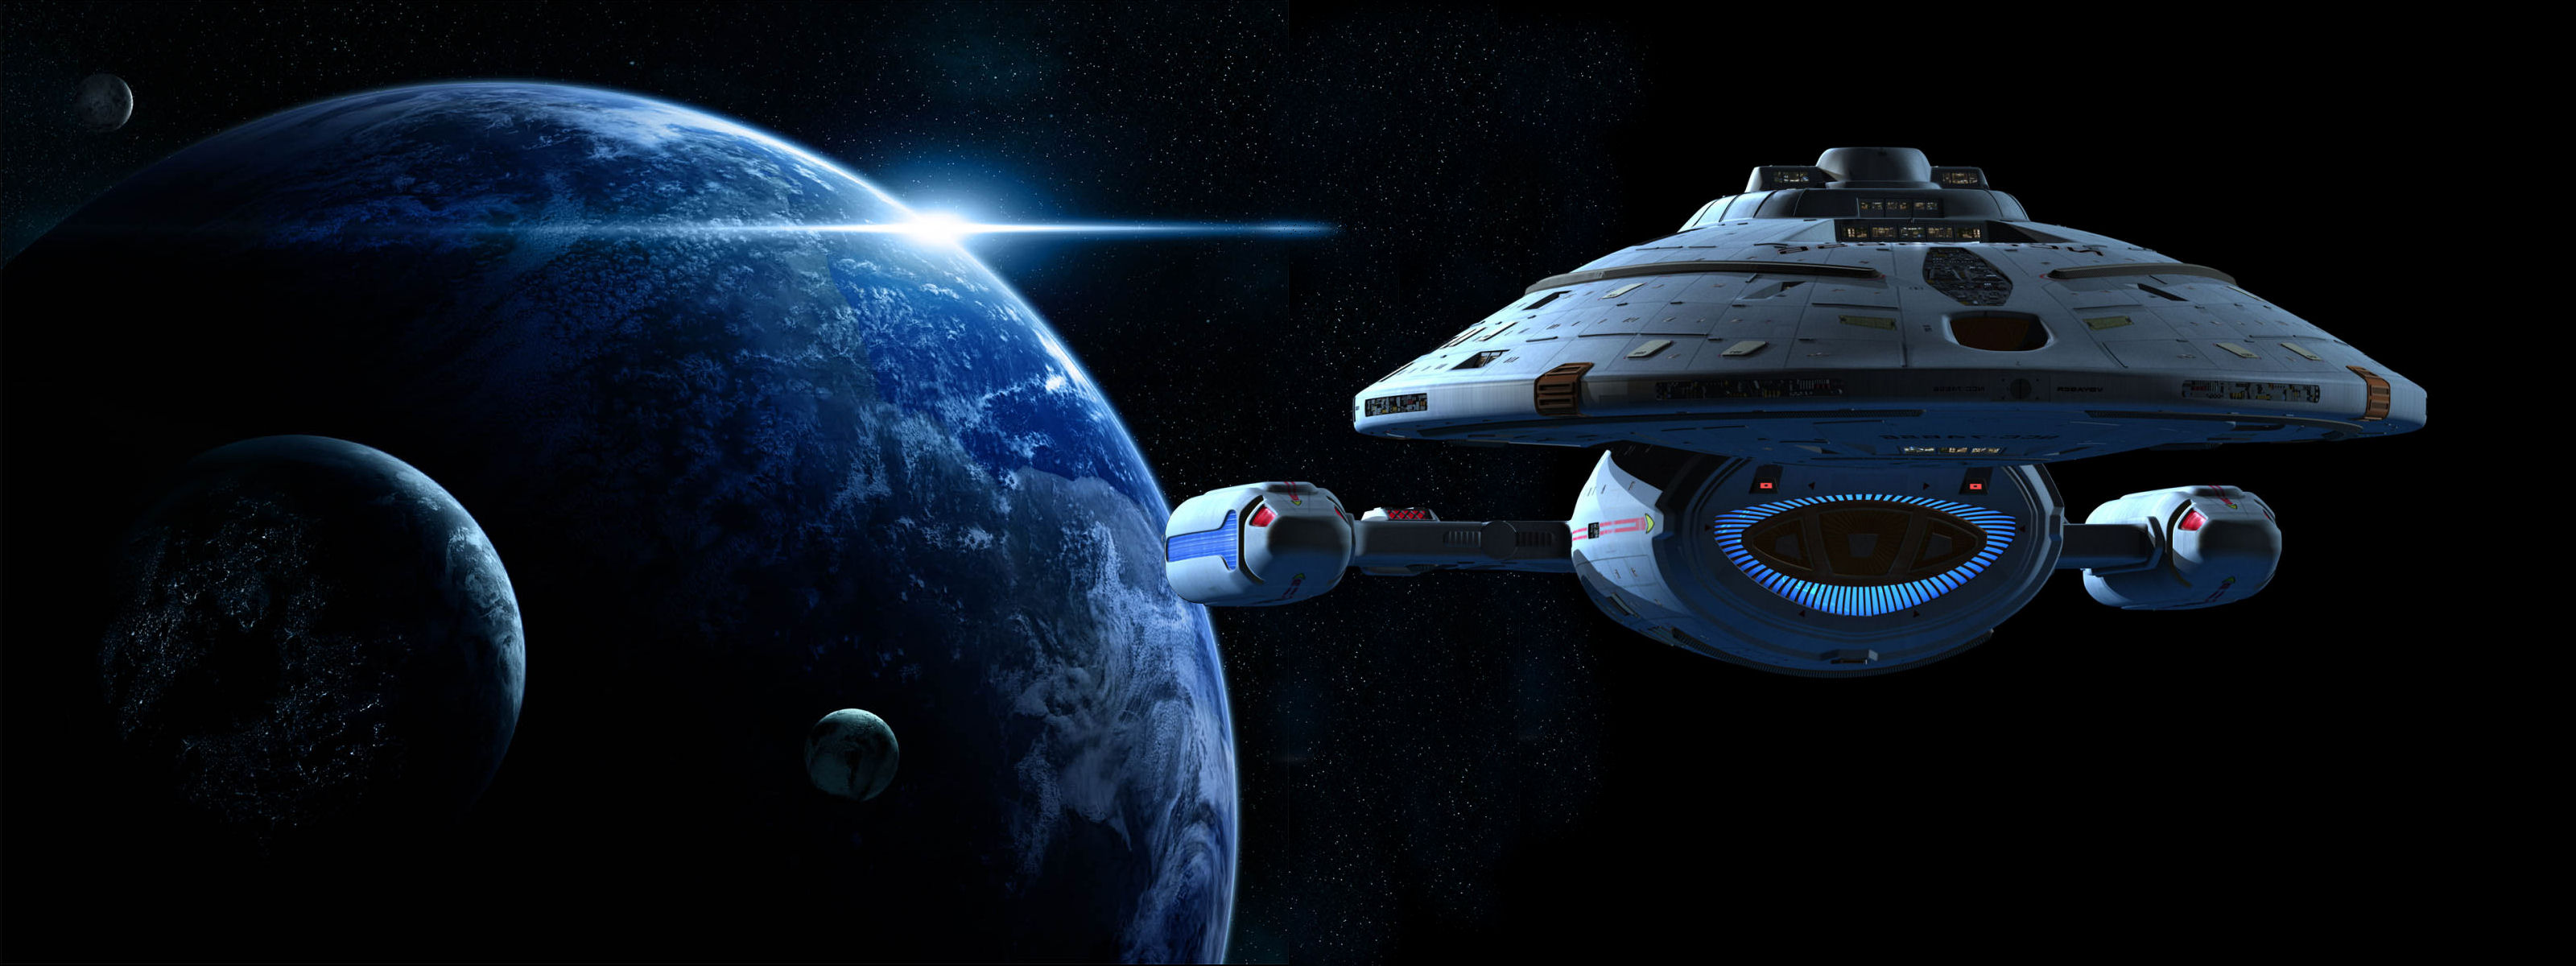 What Are Your Favorite Spaceships From Movies And Television Sff